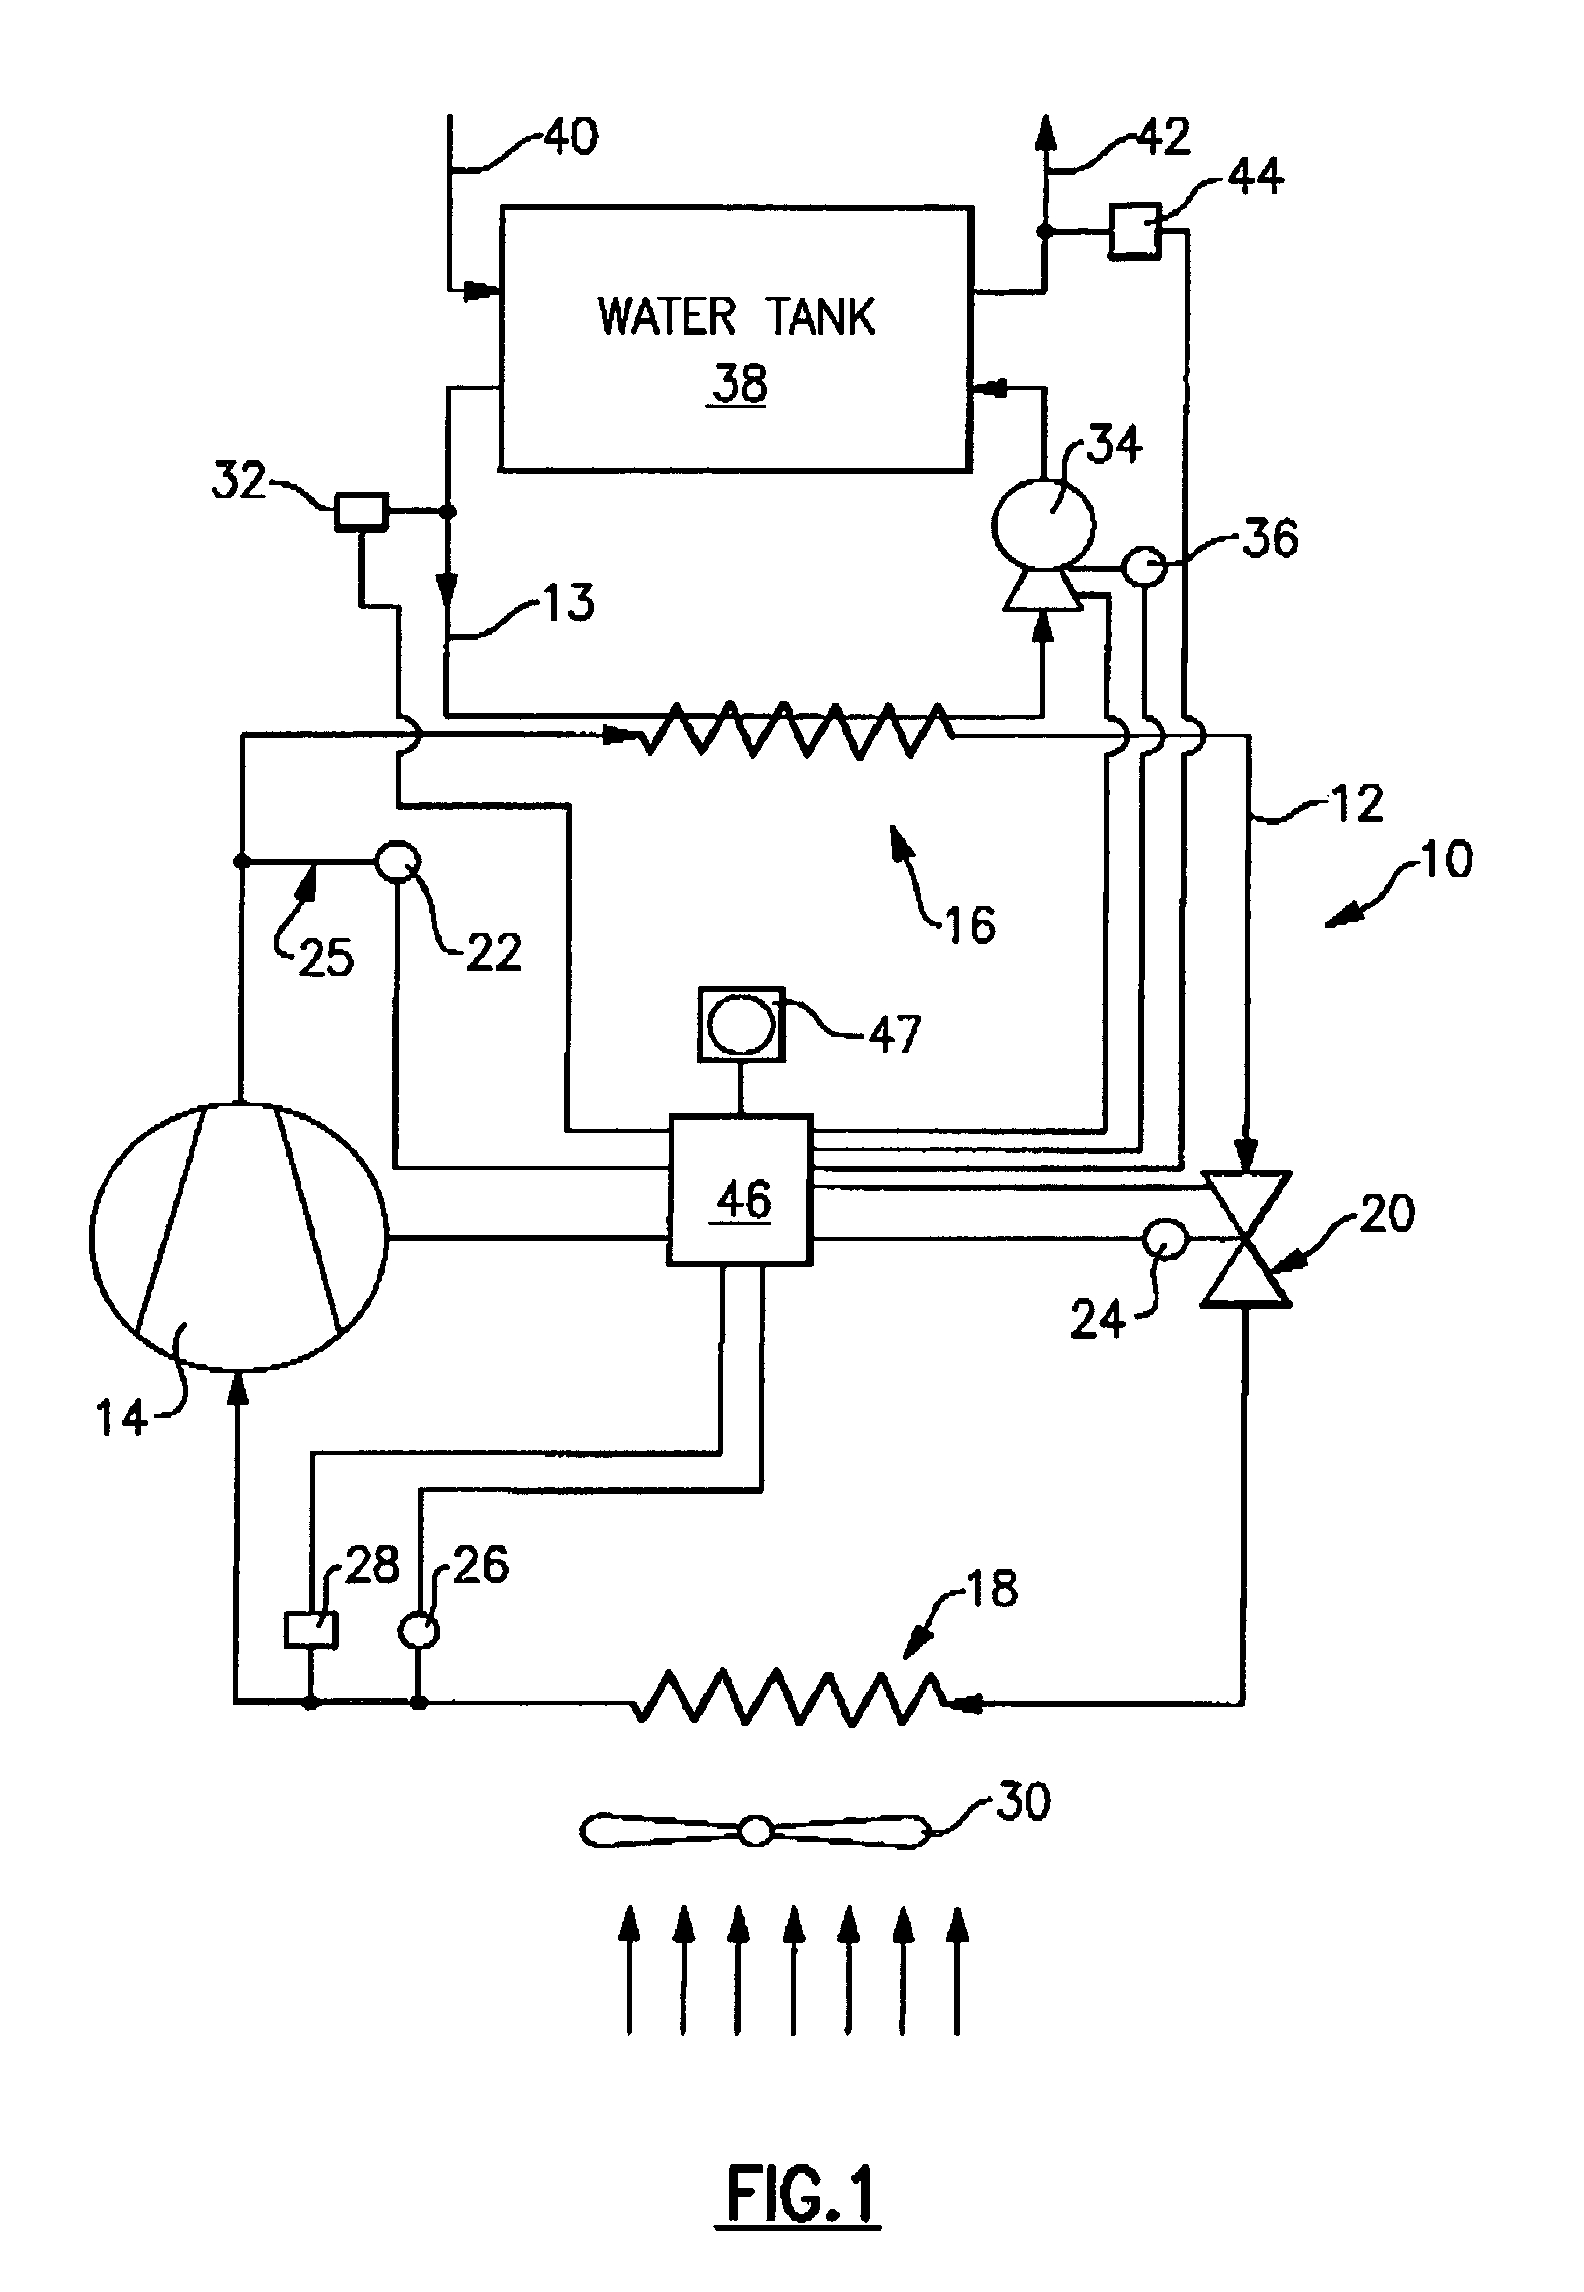 Method of controlling a carbon dioxide heat pump water heating system